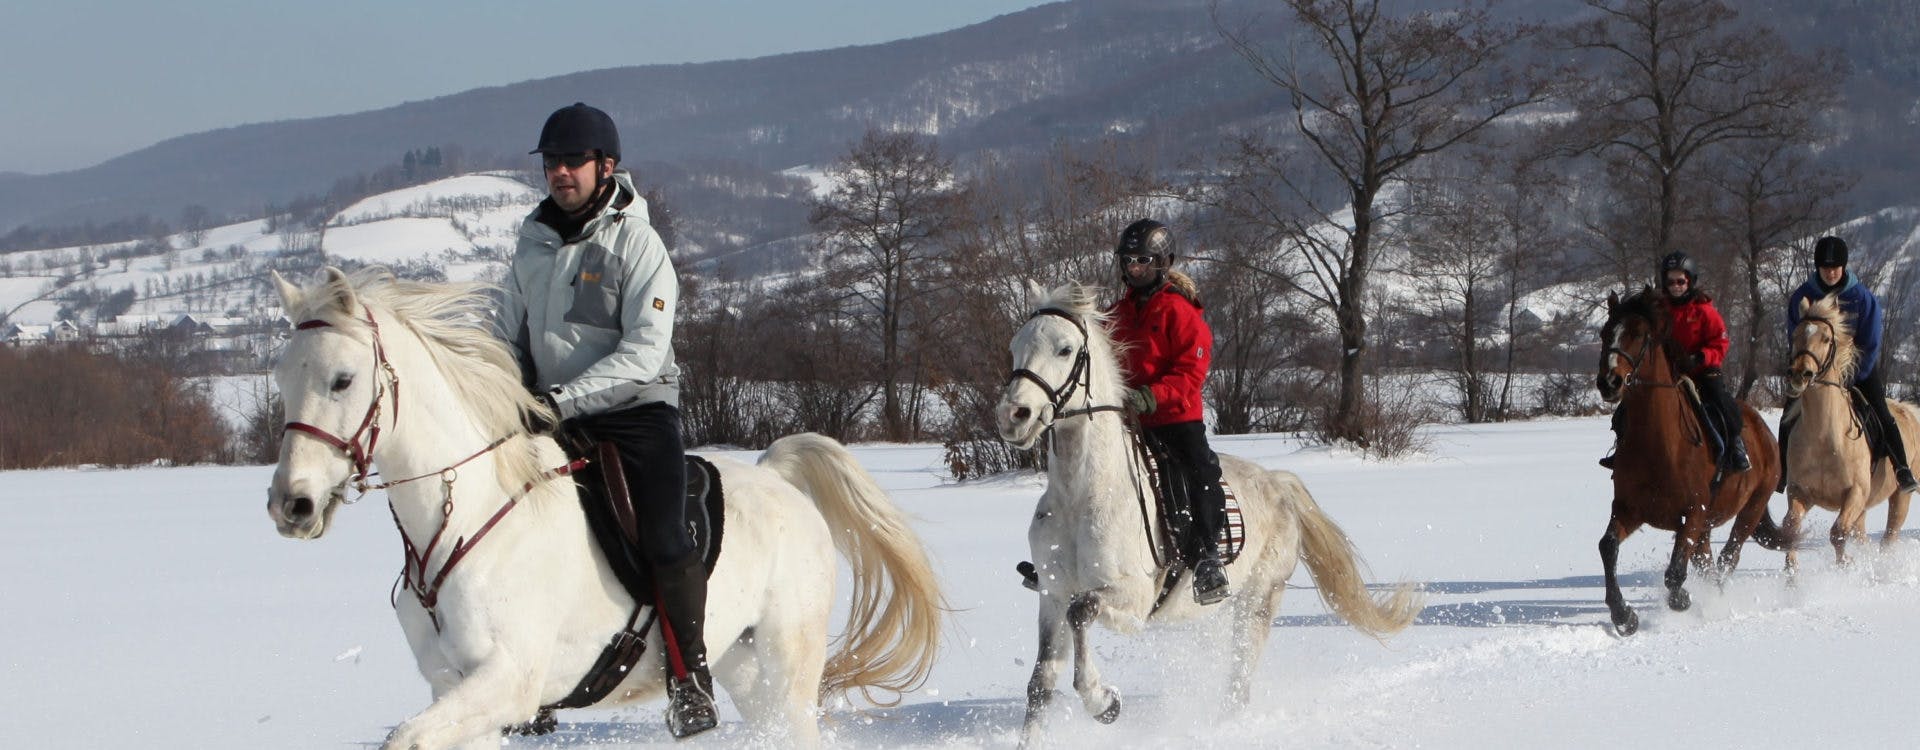 Horse riding experience near Bansko with transfer Musement